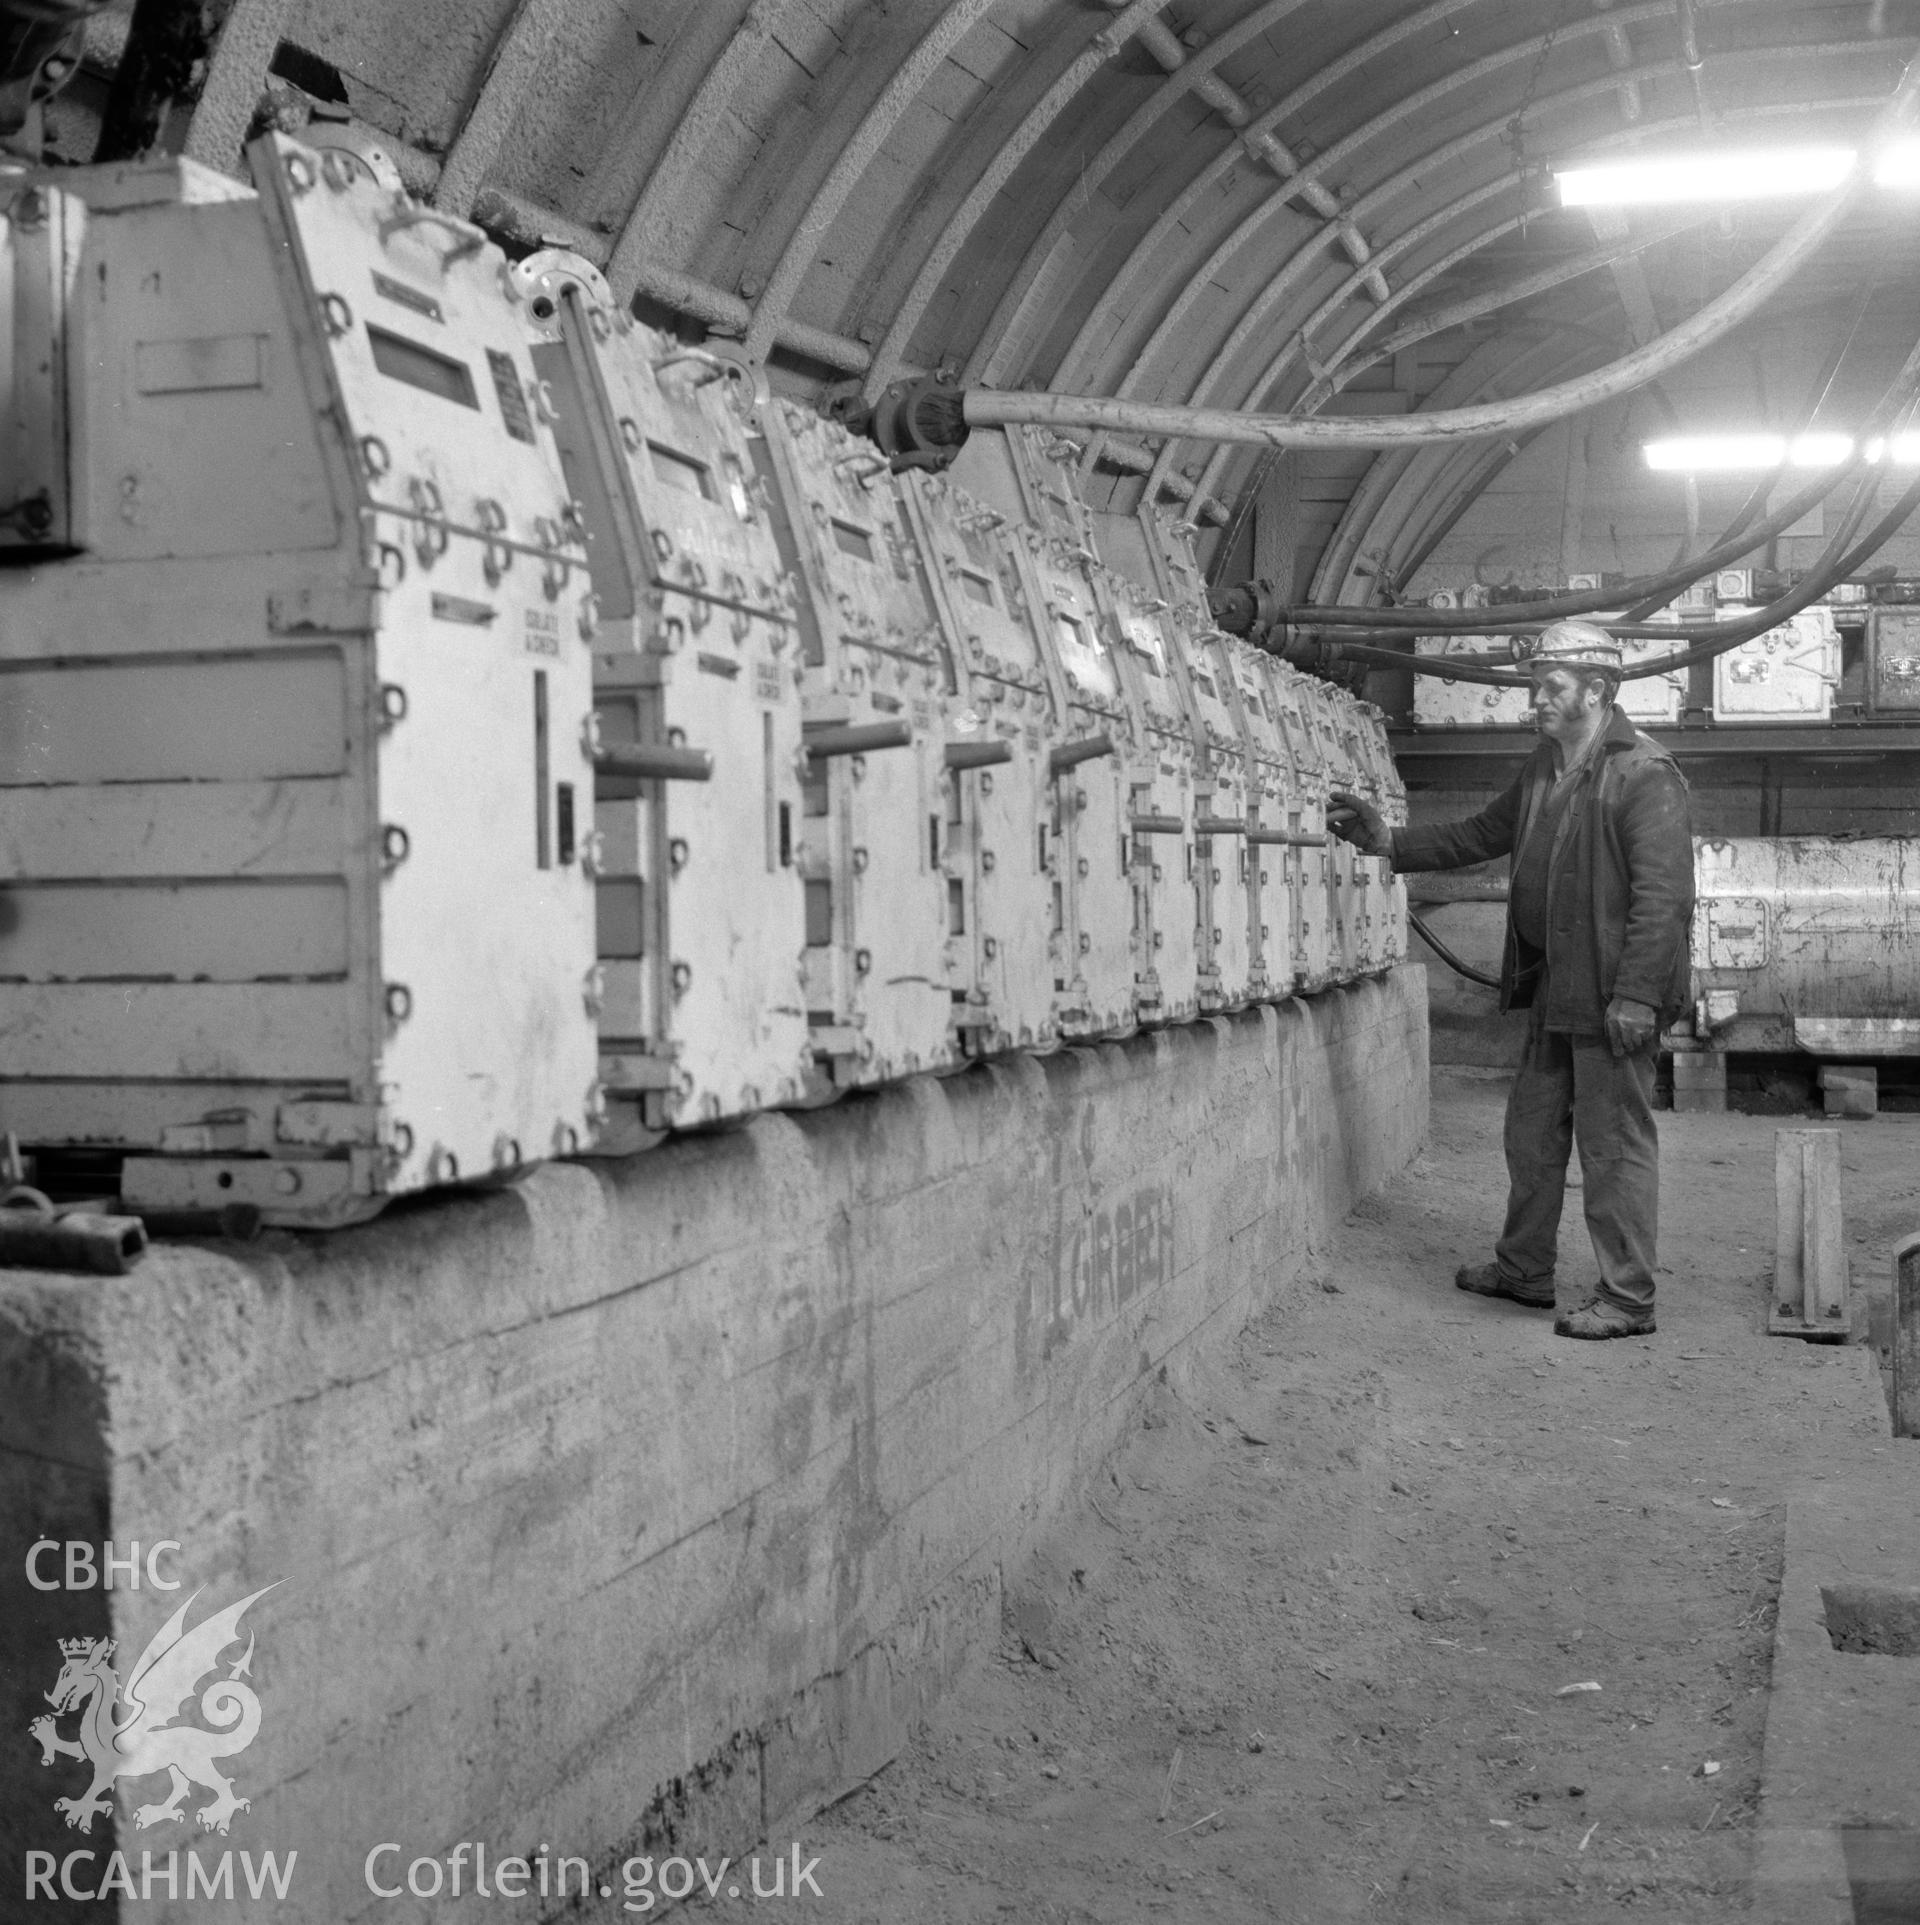 Digital copy of an acetate negative showing underground electric station at Blaensercahn Colliery, from the John Cornwell Collection.